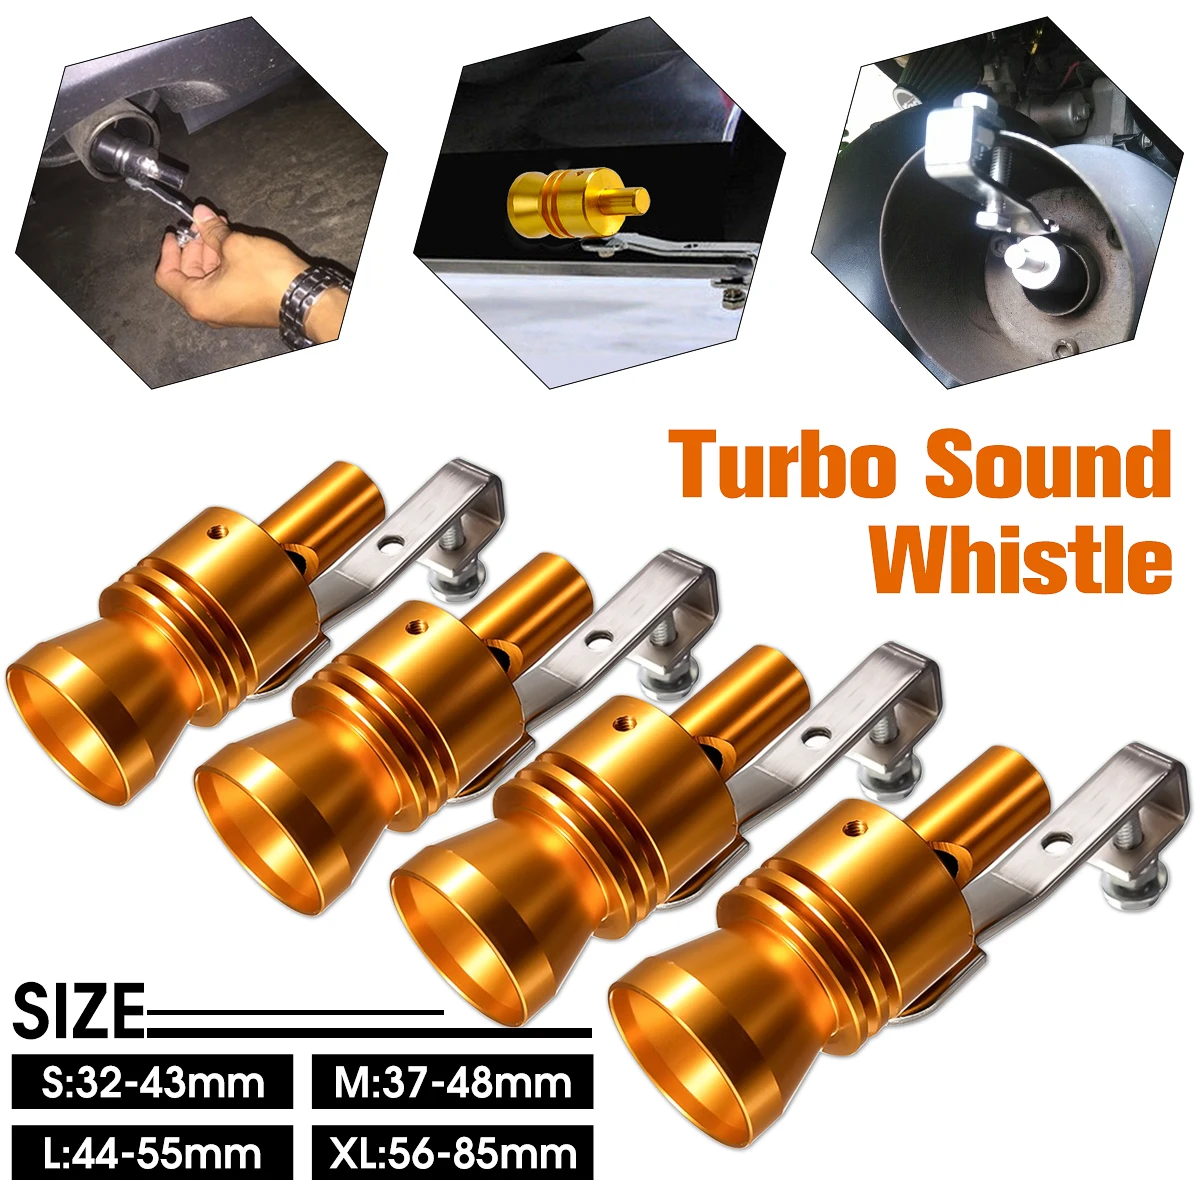 XL Turbo Sound Noise Exhaust Muffler Pipe Whistle Off Valve BOV Simulator Parts